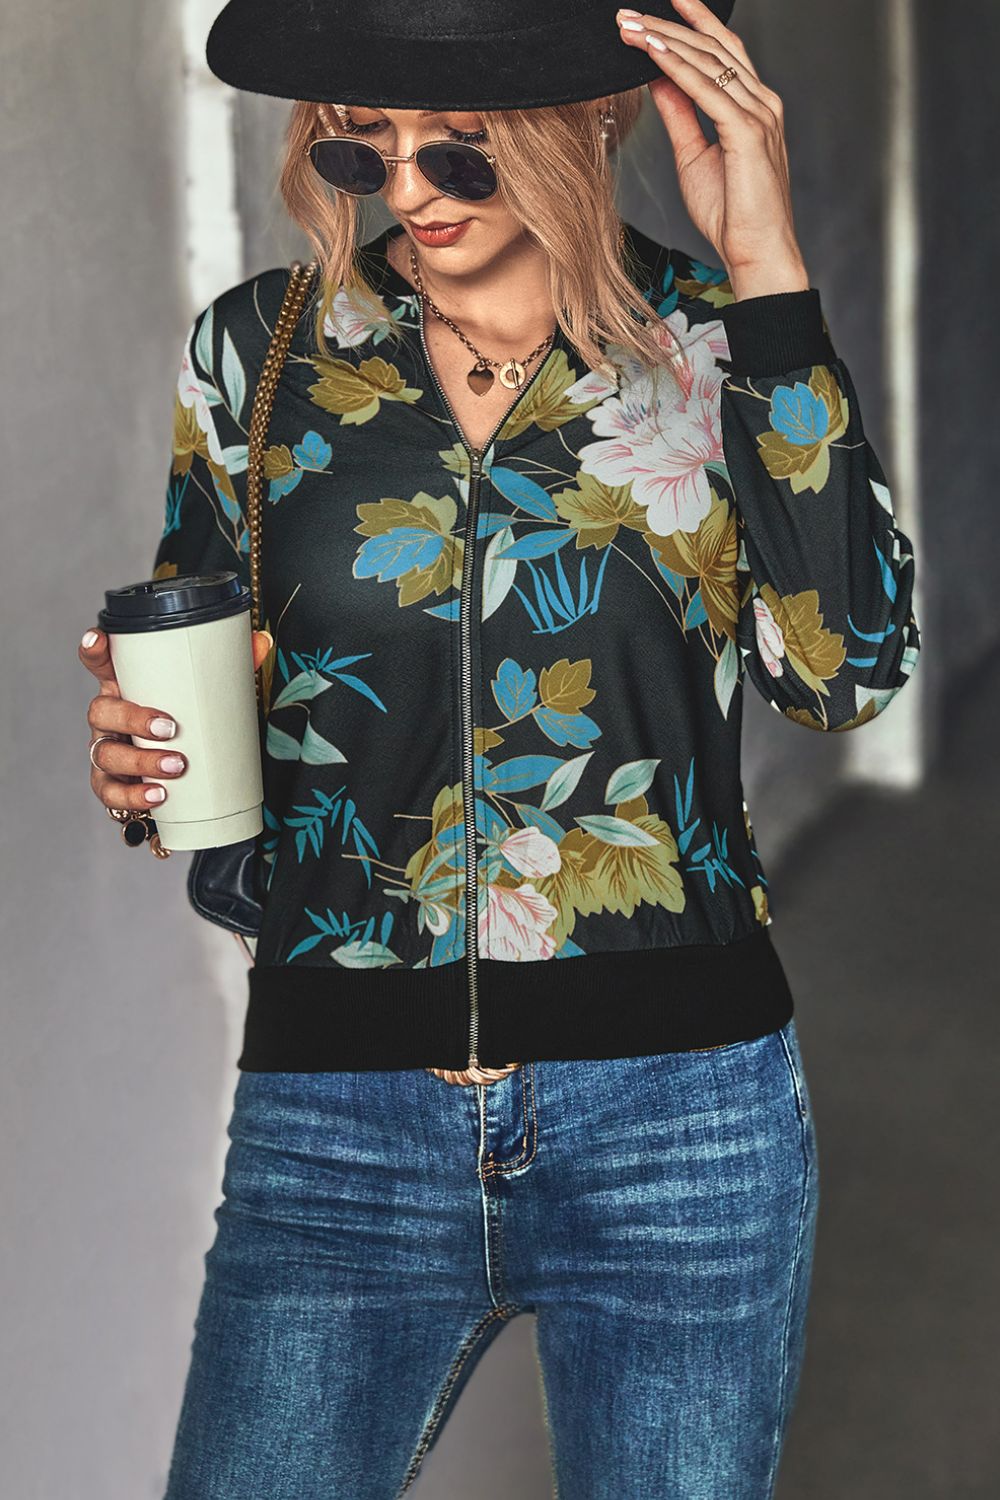 Blonde Woman wearing a black floral zip up lightweight floral bomber jacket with jeans